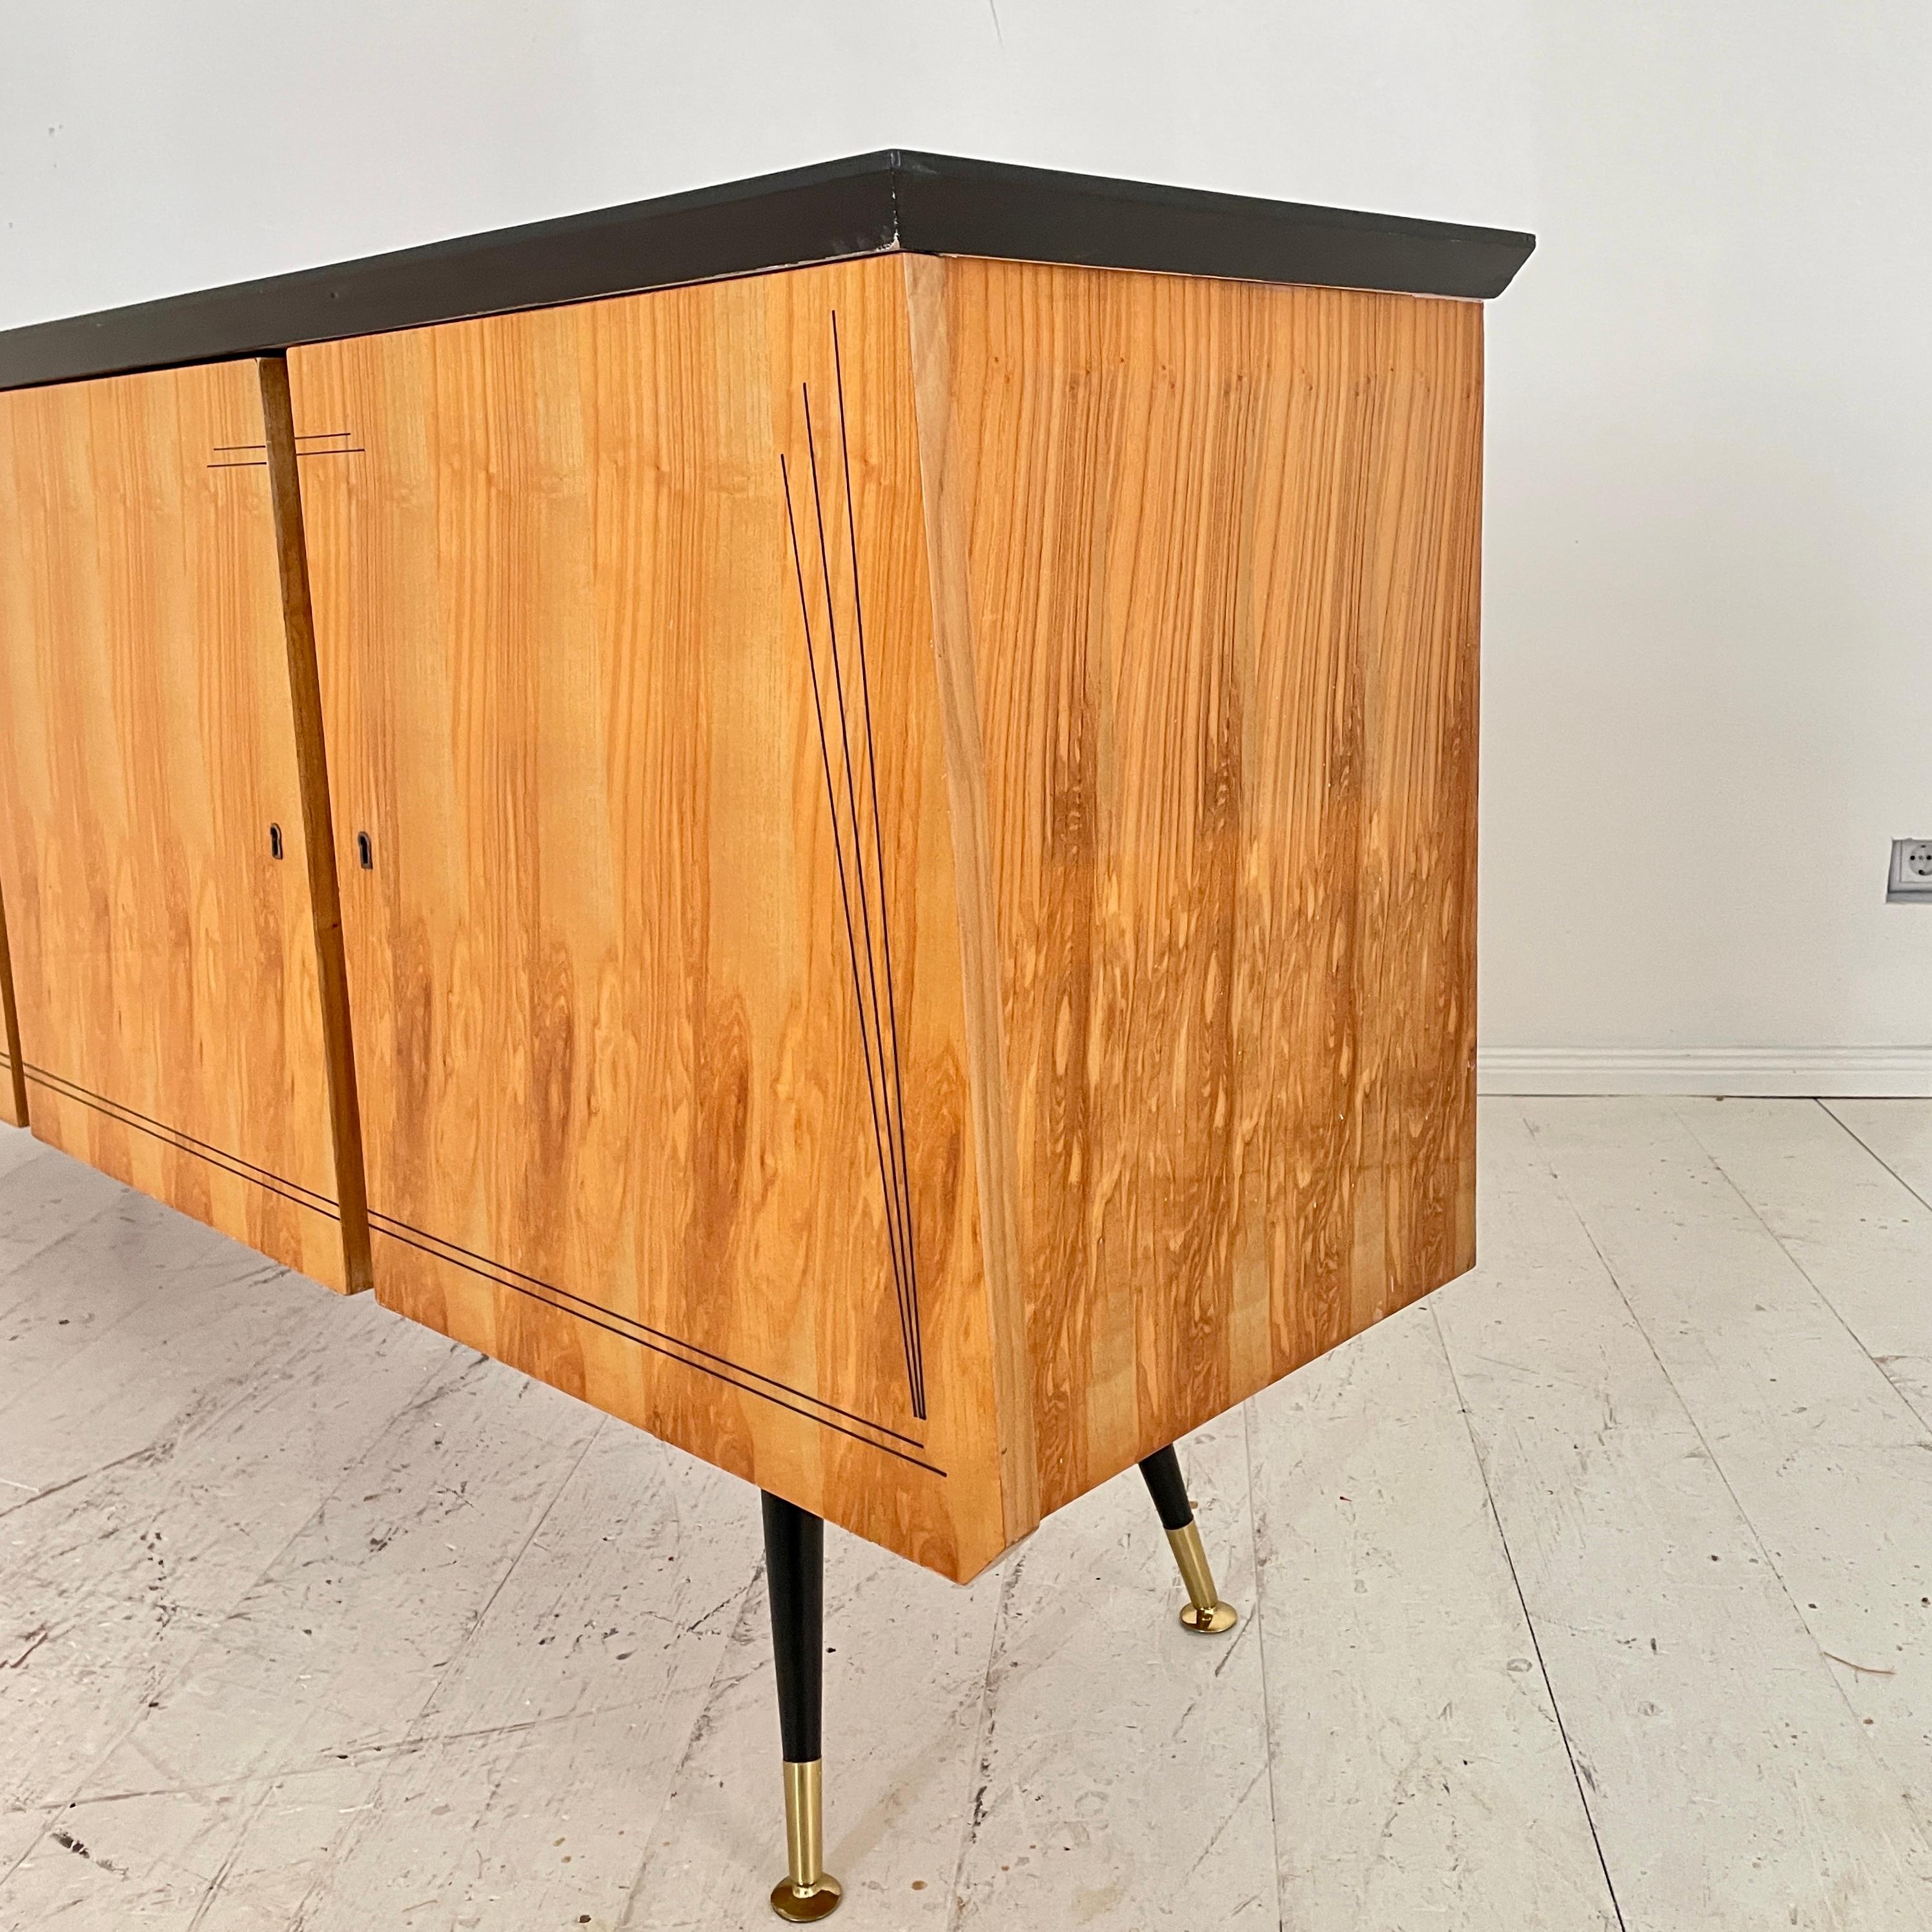 Italian Midcentury Sideboard with 4 Doors in Ash, Black and Brass, Around 1950 For Sale 3